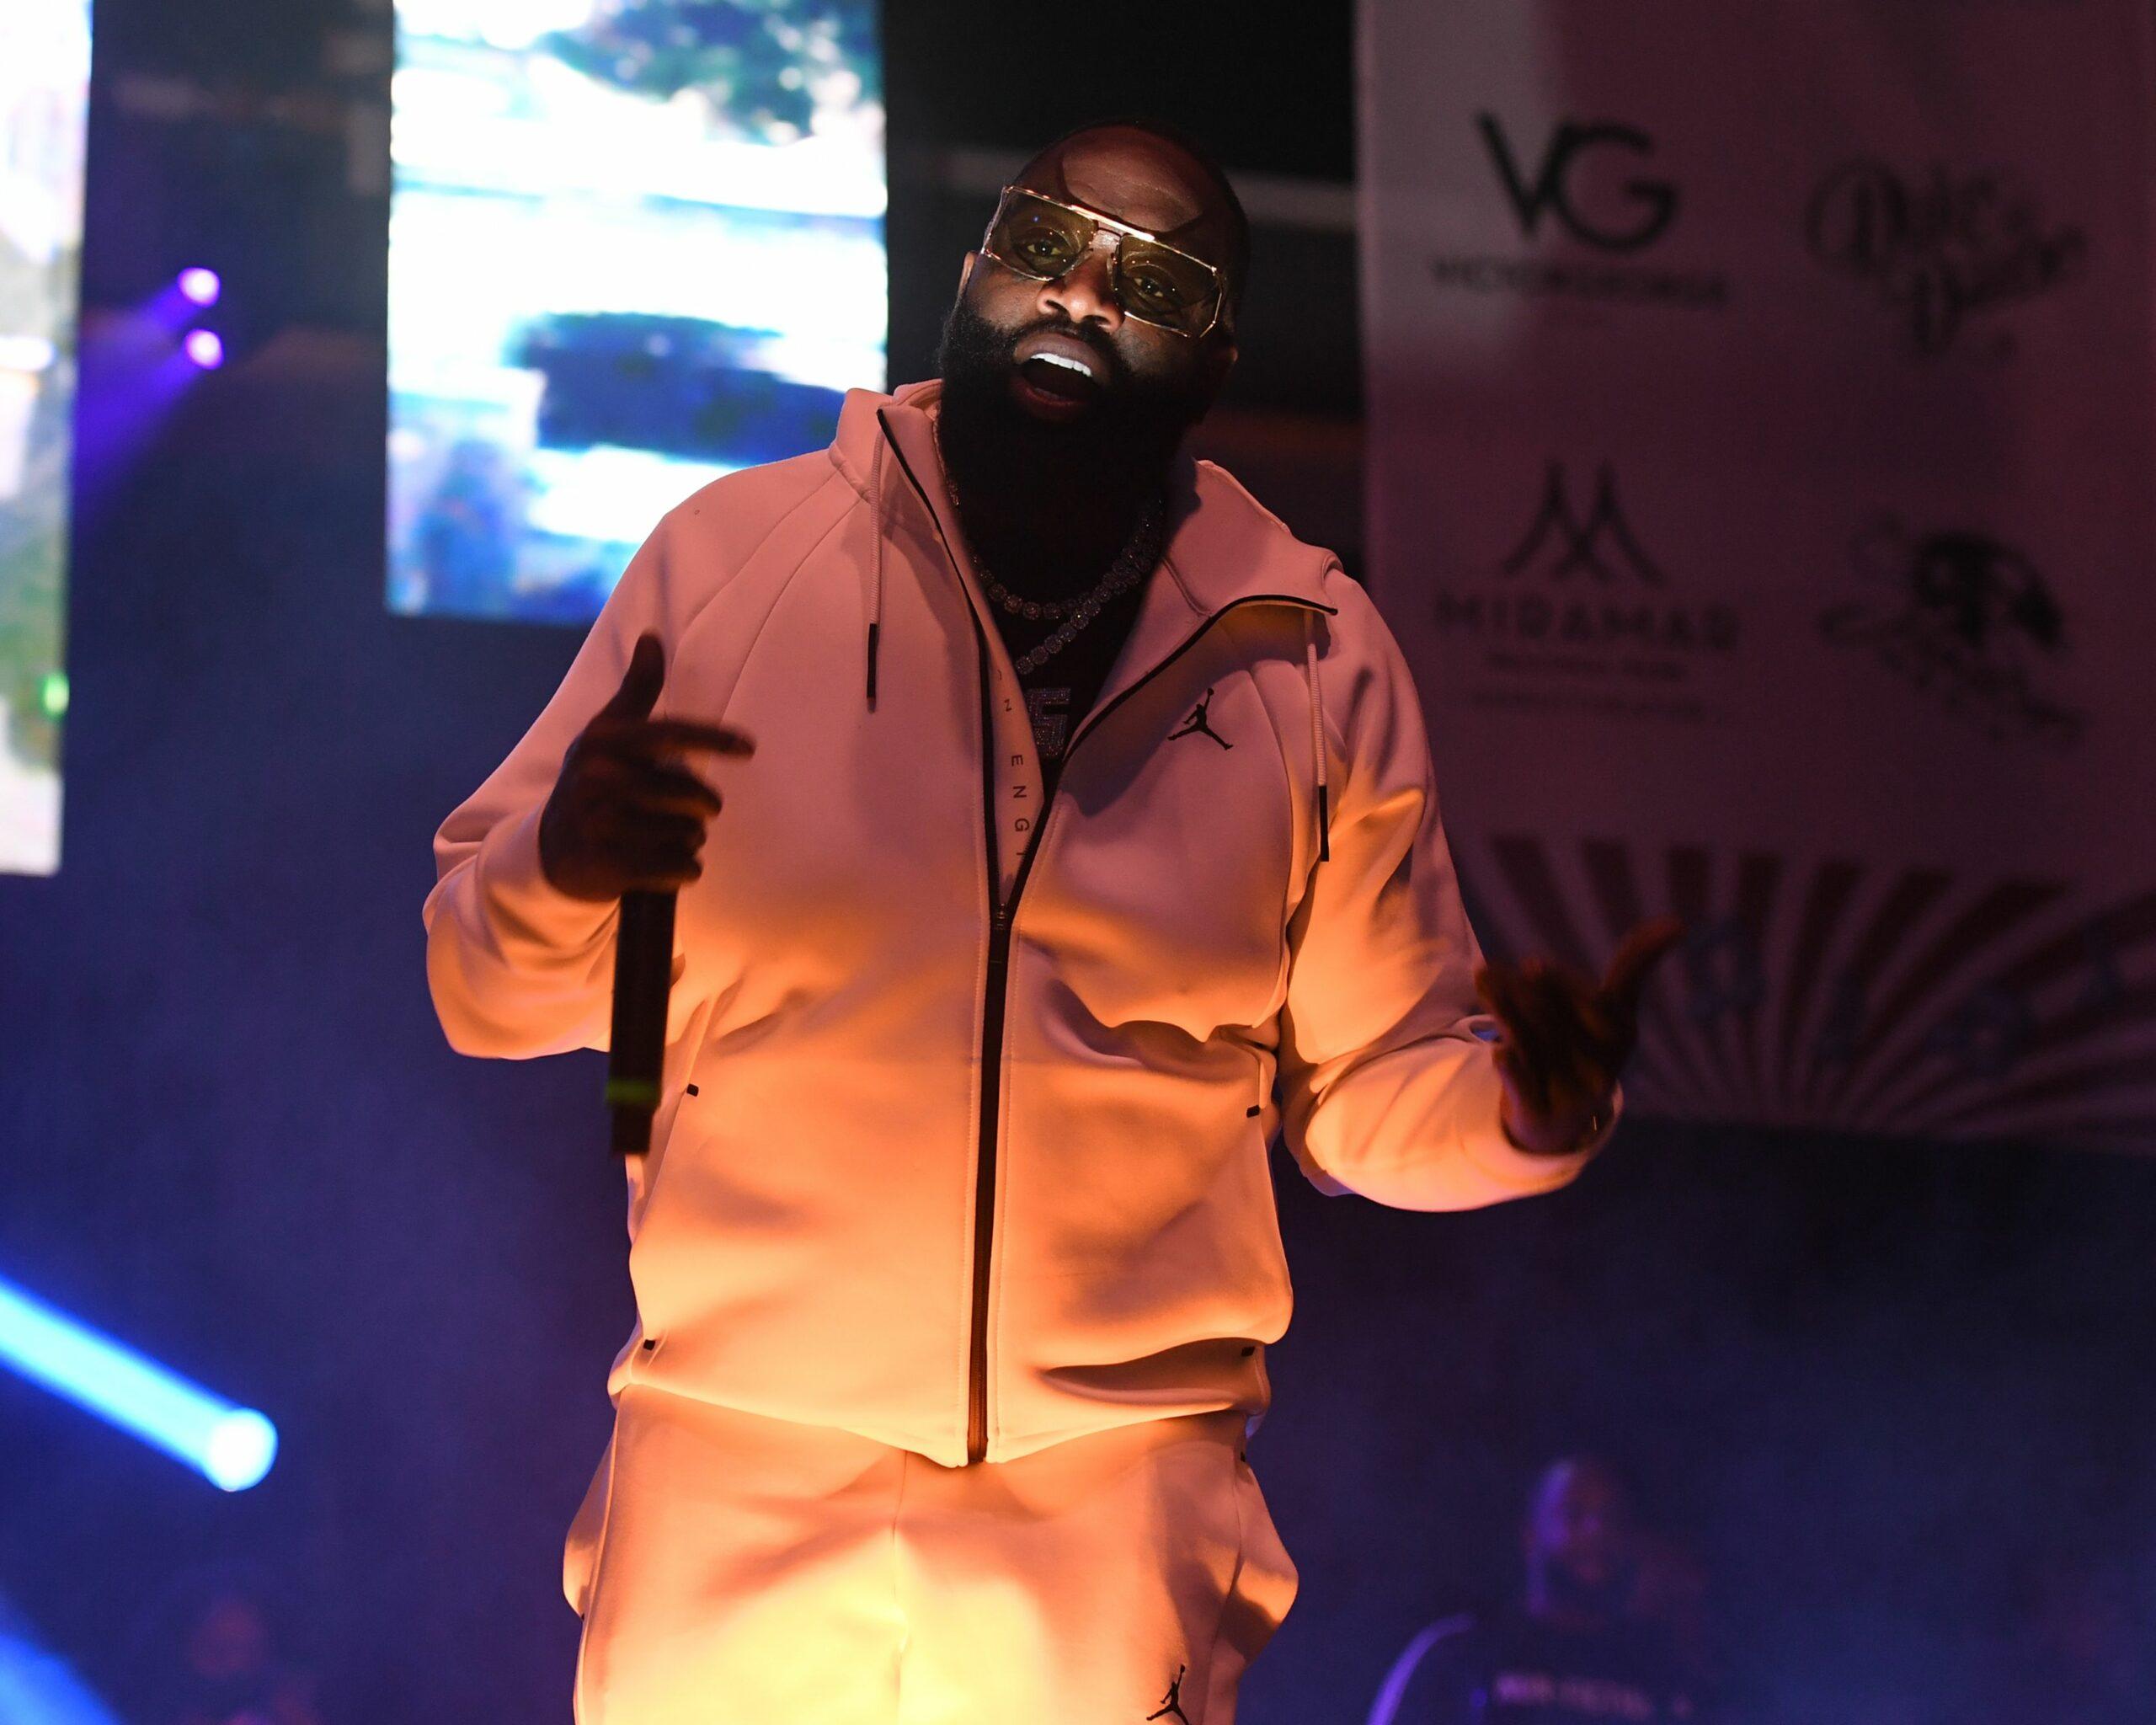 Rick Ross back performing in 2021